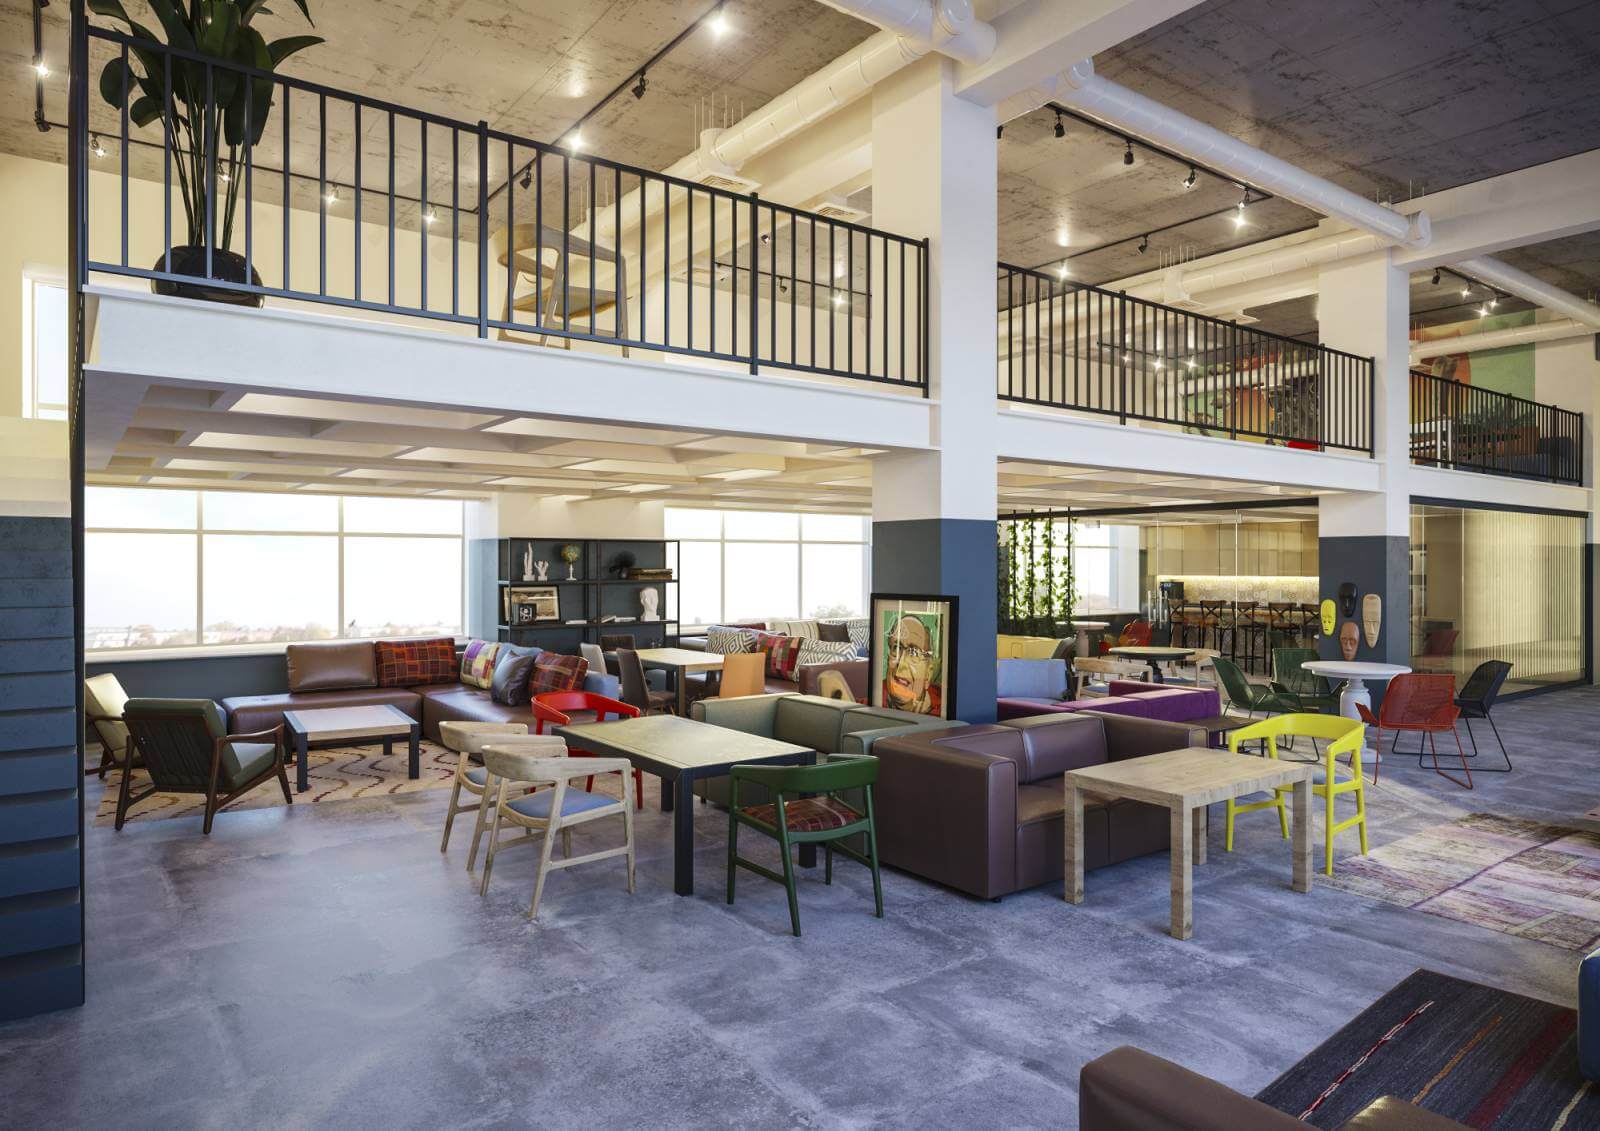 Strengthening the benefits of the co-working space through design